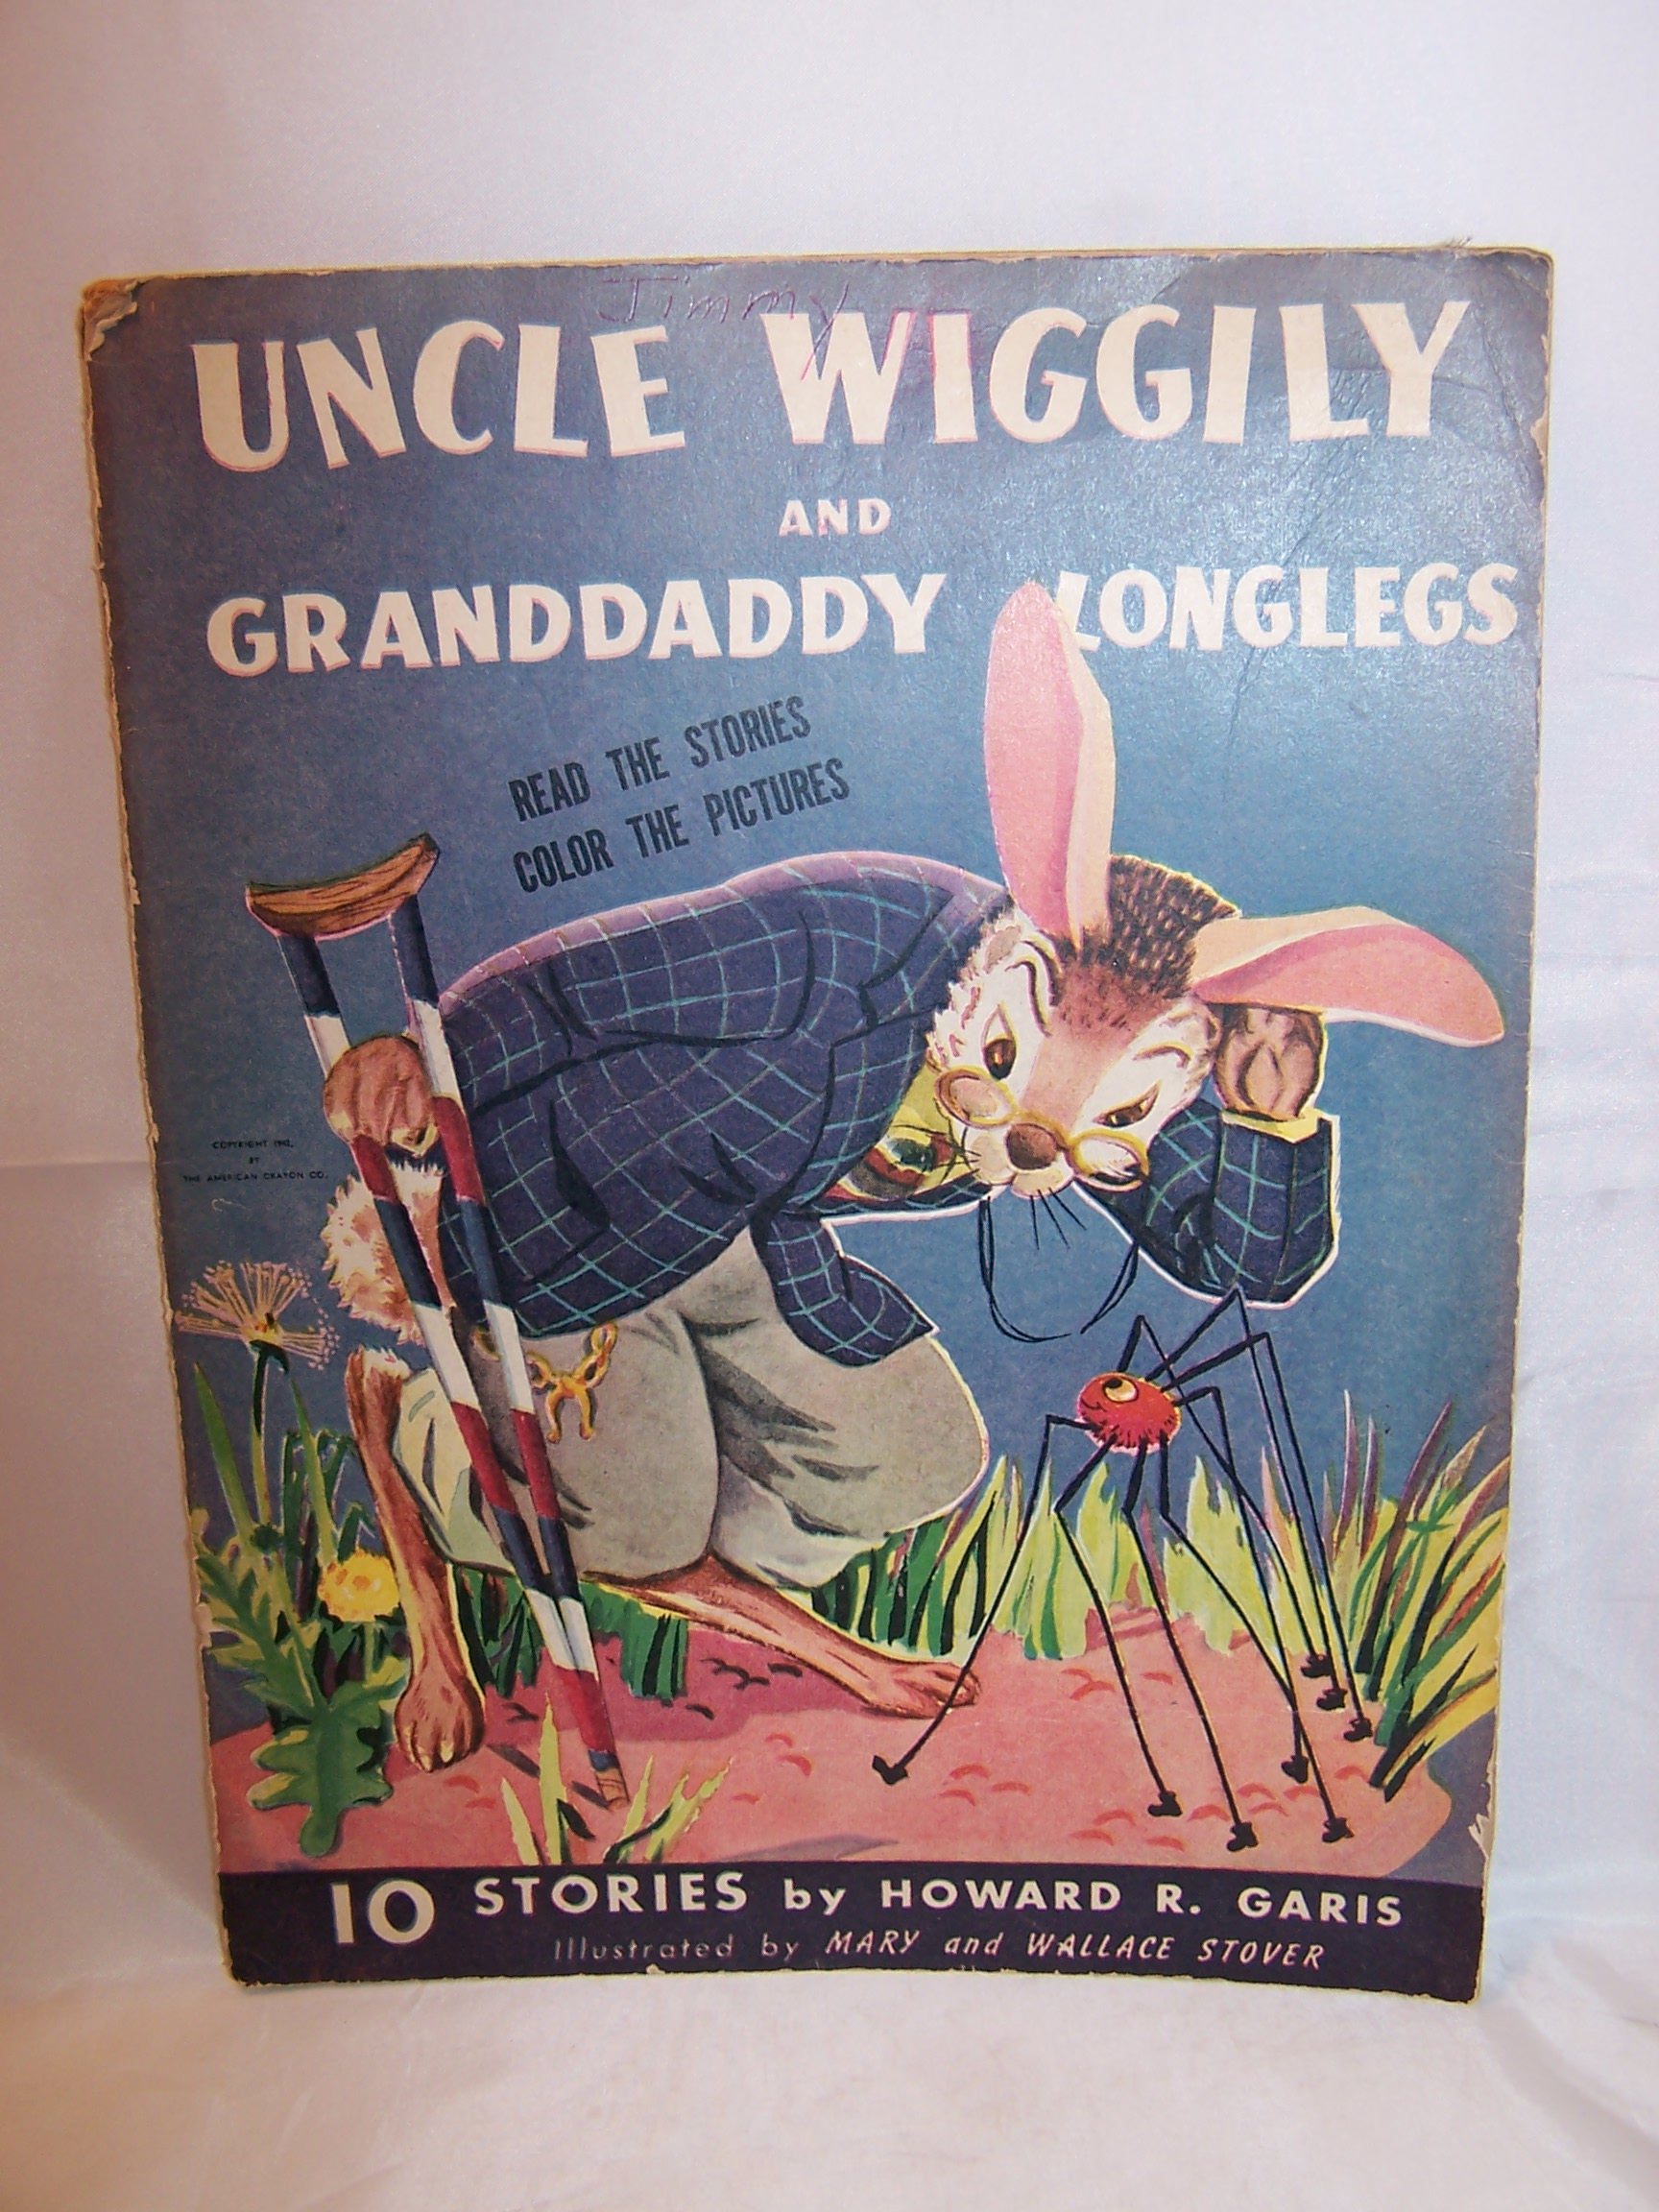 Uncle Wiggily and Granddaddy